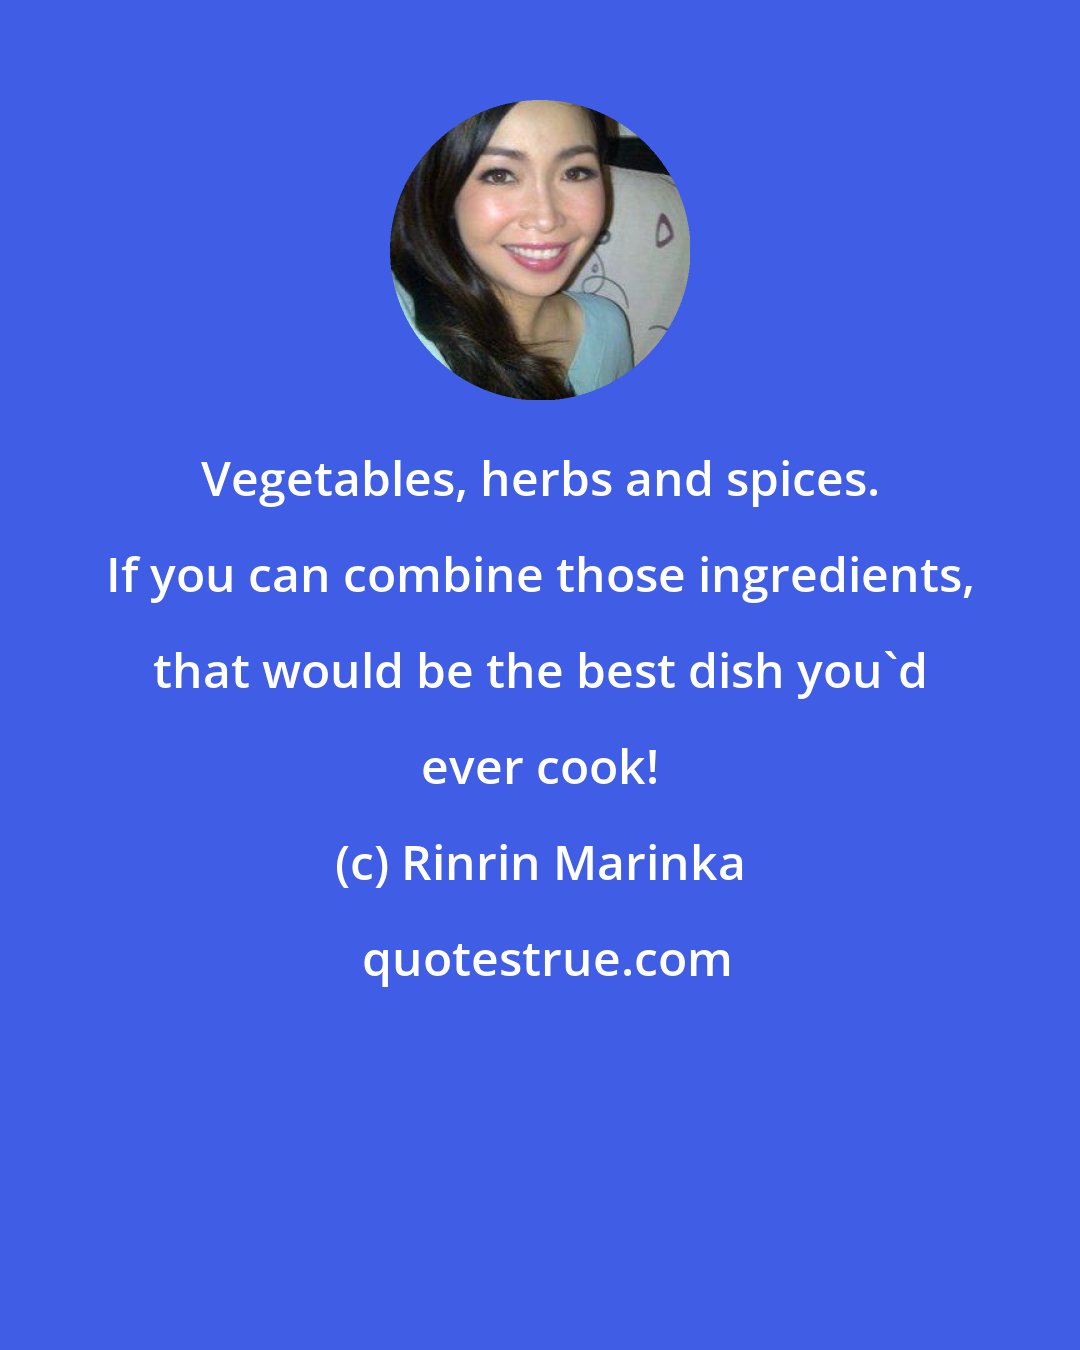 Rinrin Marinka: Vegetables, herbs and spices. If you can combine those ingredients, that would be the best dish you'd ever cook!